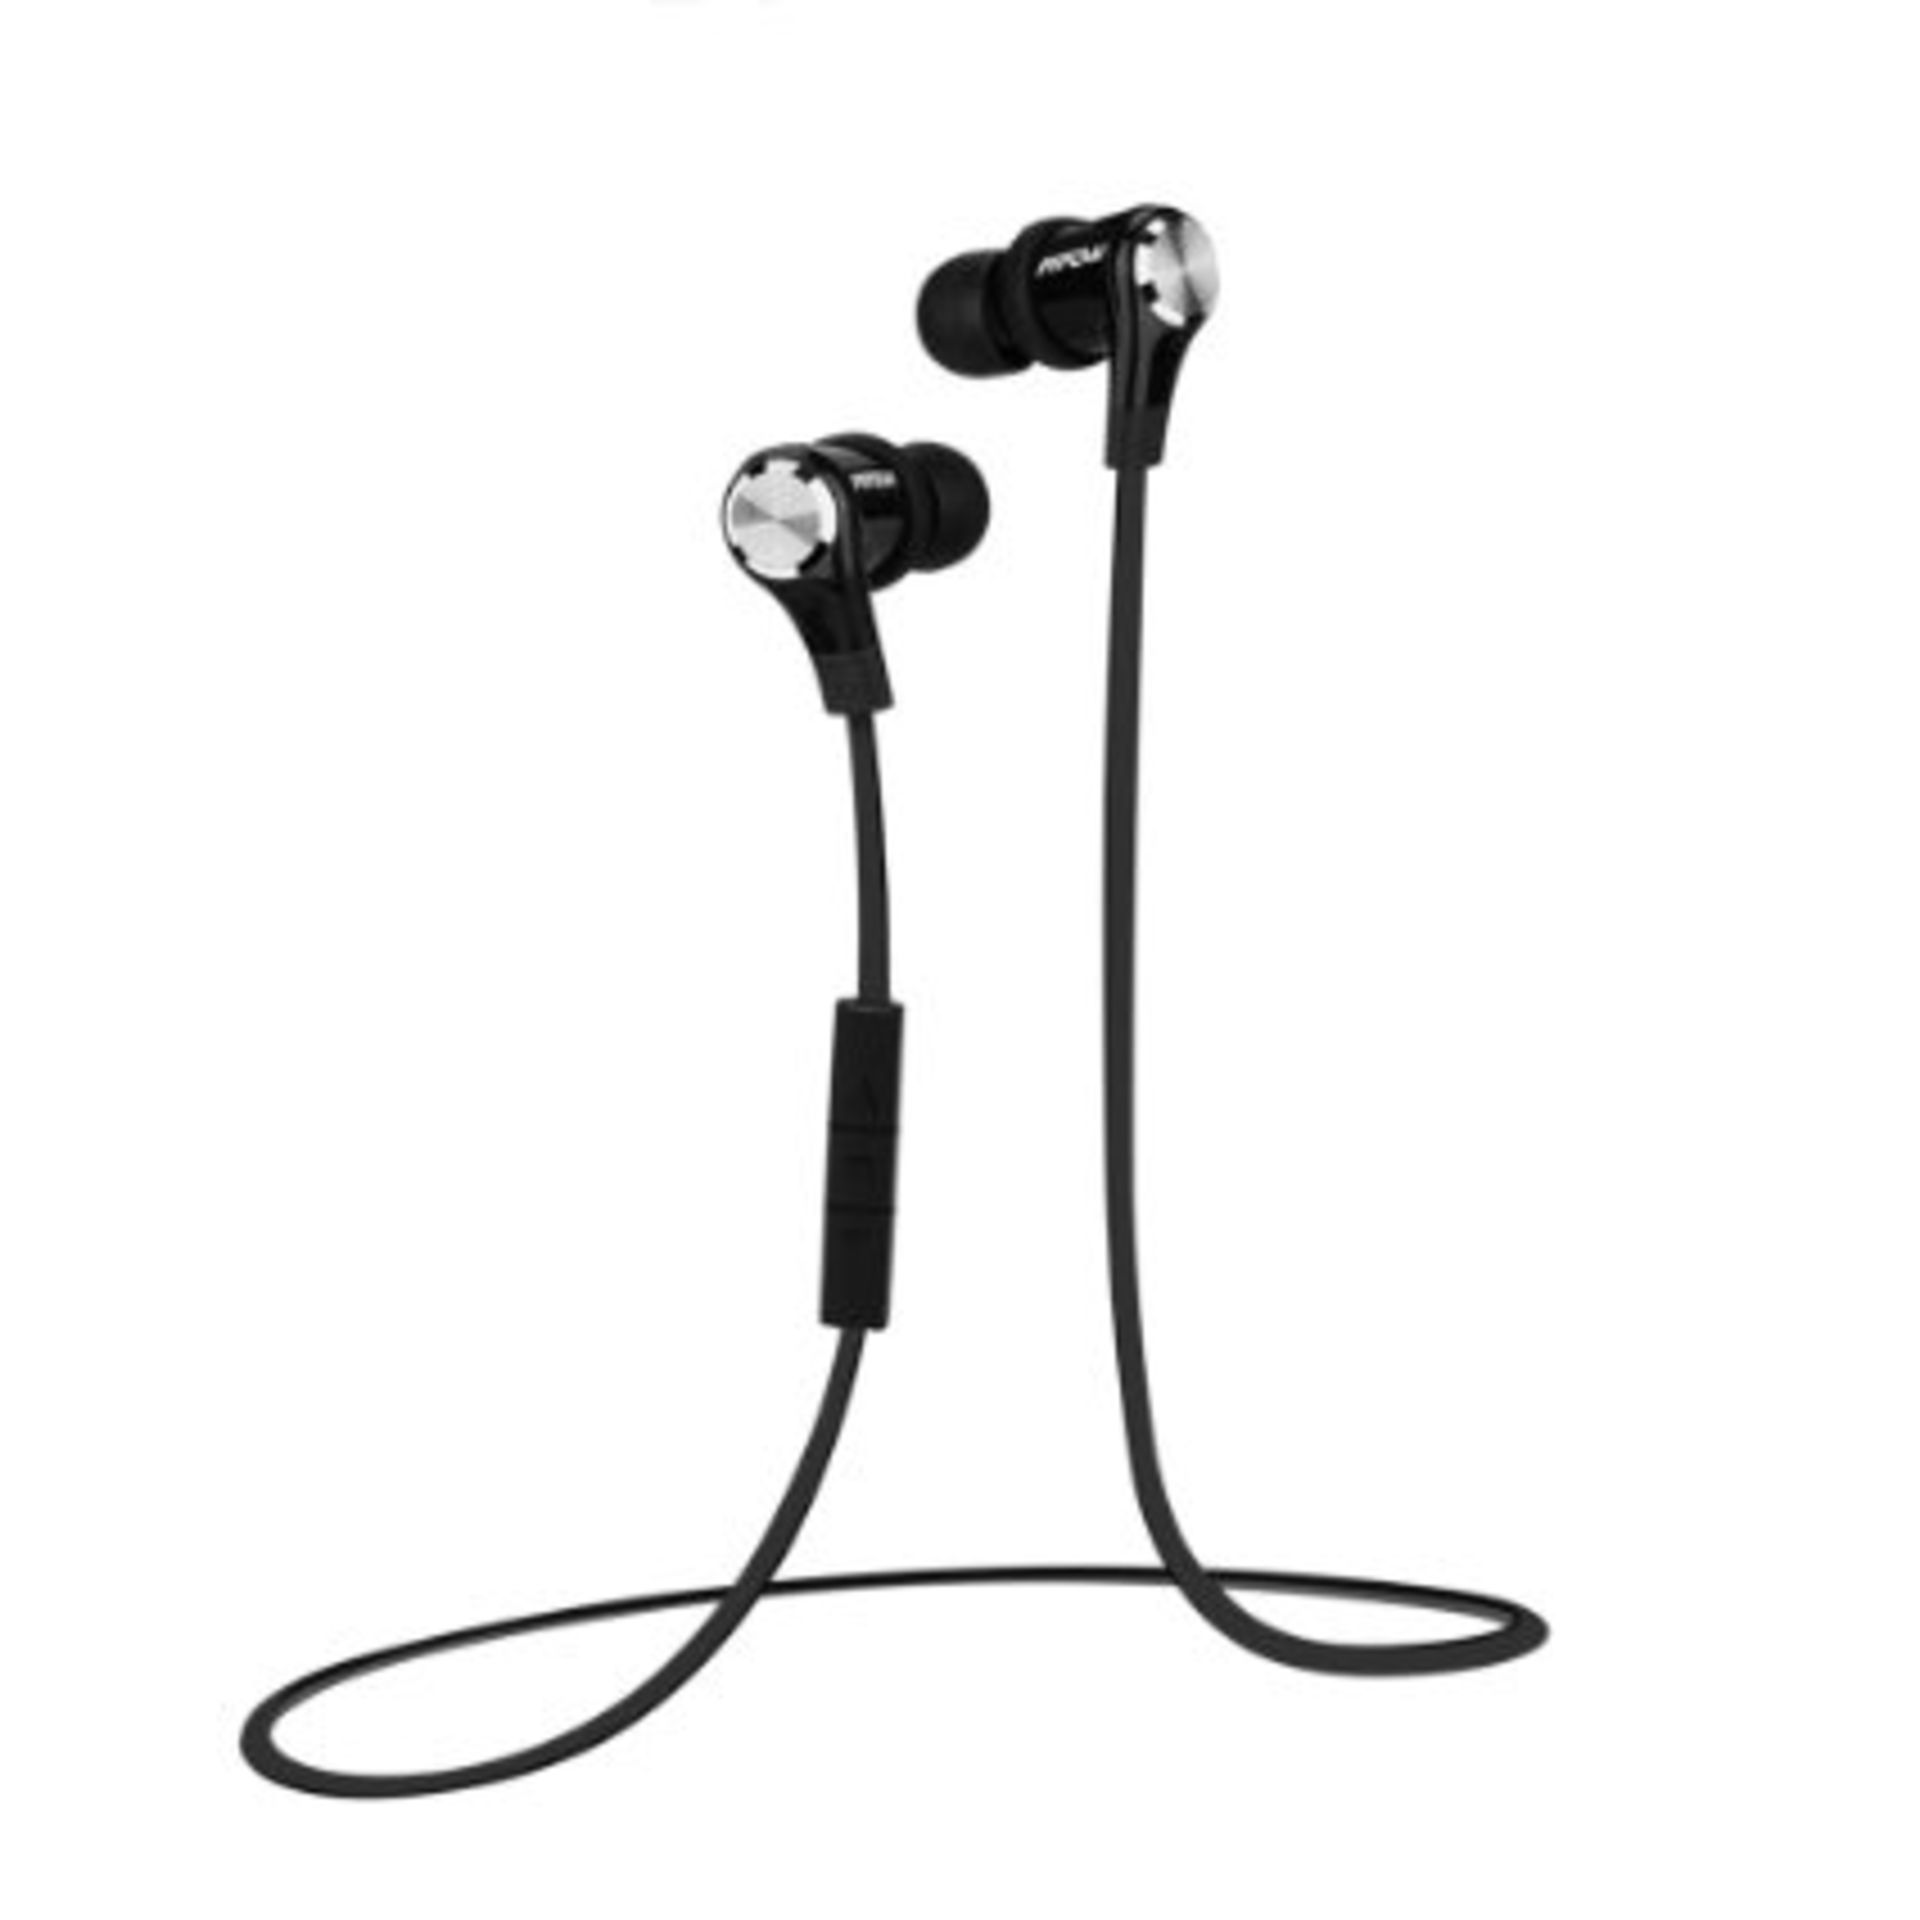 V Grade U Pair of Bluetooth Earphones/Headset (All Boxed) - Colours and Styles/Makes May Vary - Some - Image 2 of 7